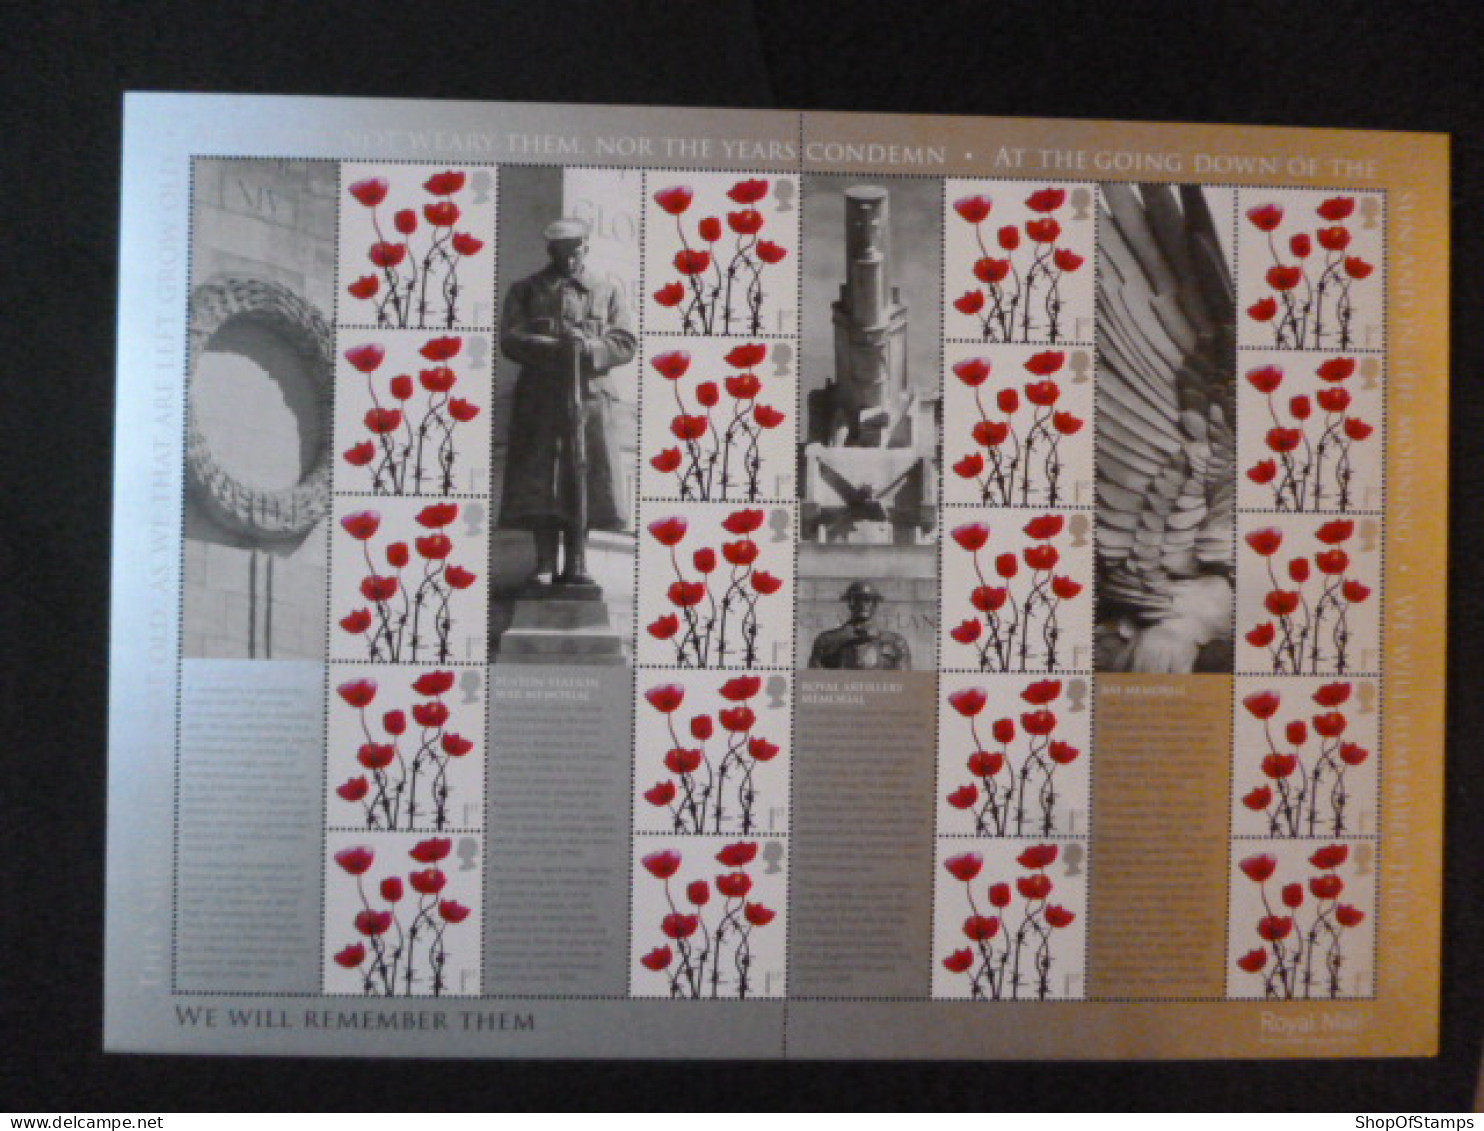 GREAT BRITAIN SG 2883 WE WILL REMEMBER THEM 20 STAMPS SMILER SHEET WITH GUTTERS & LABELS - Feuilles, Planches  Et Multiples